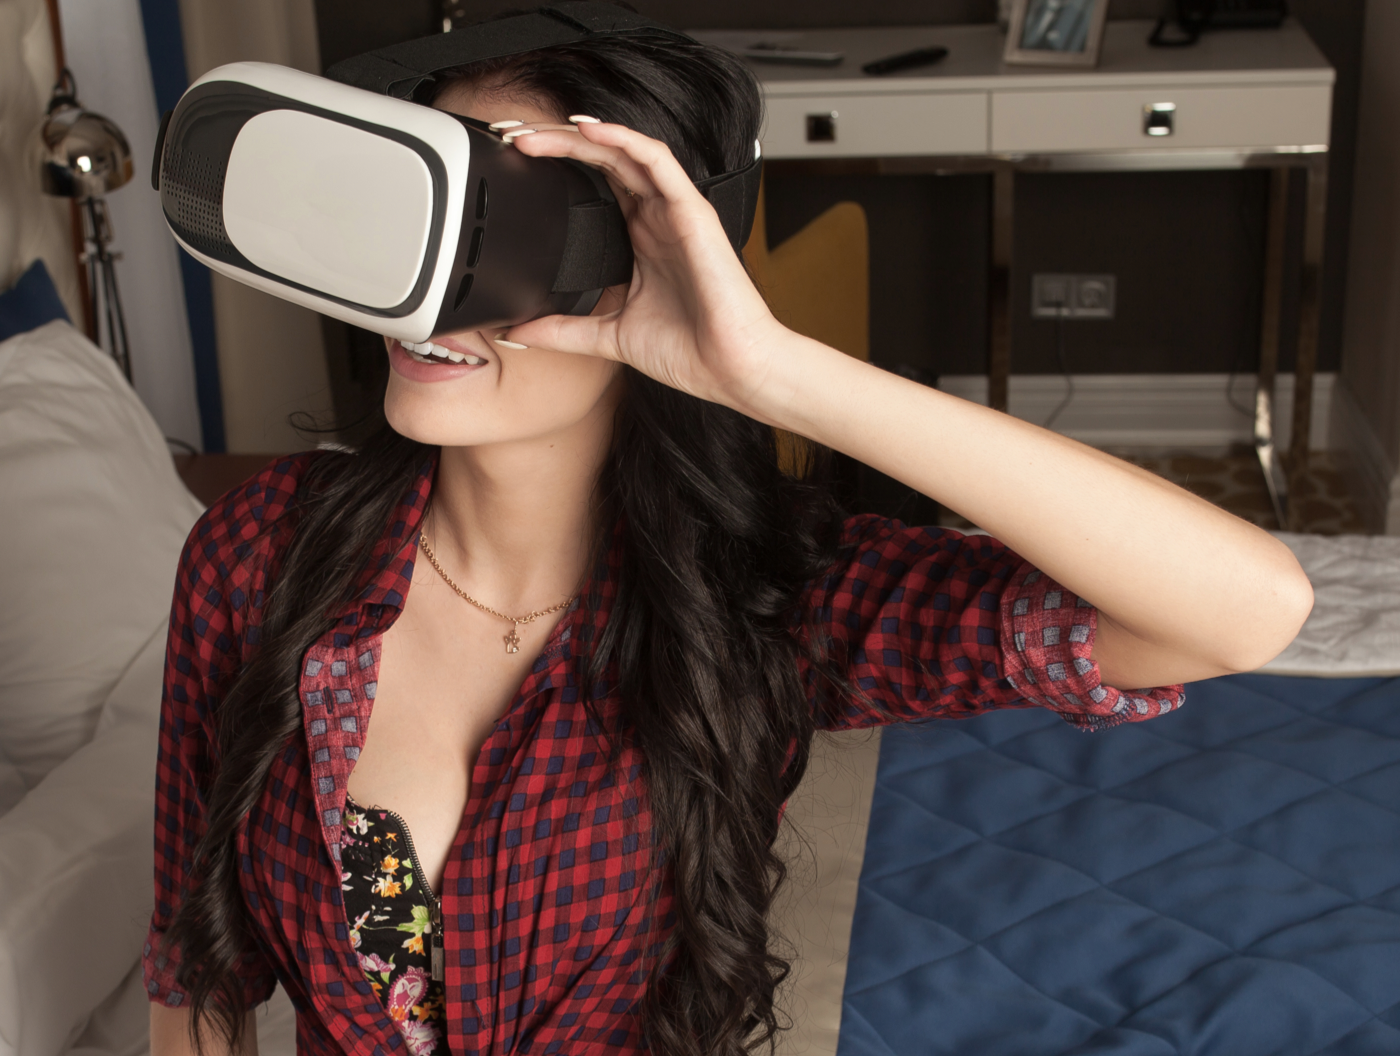 Redefining Intimacy: Exploring the Latest Technologies in Adult Entertainment